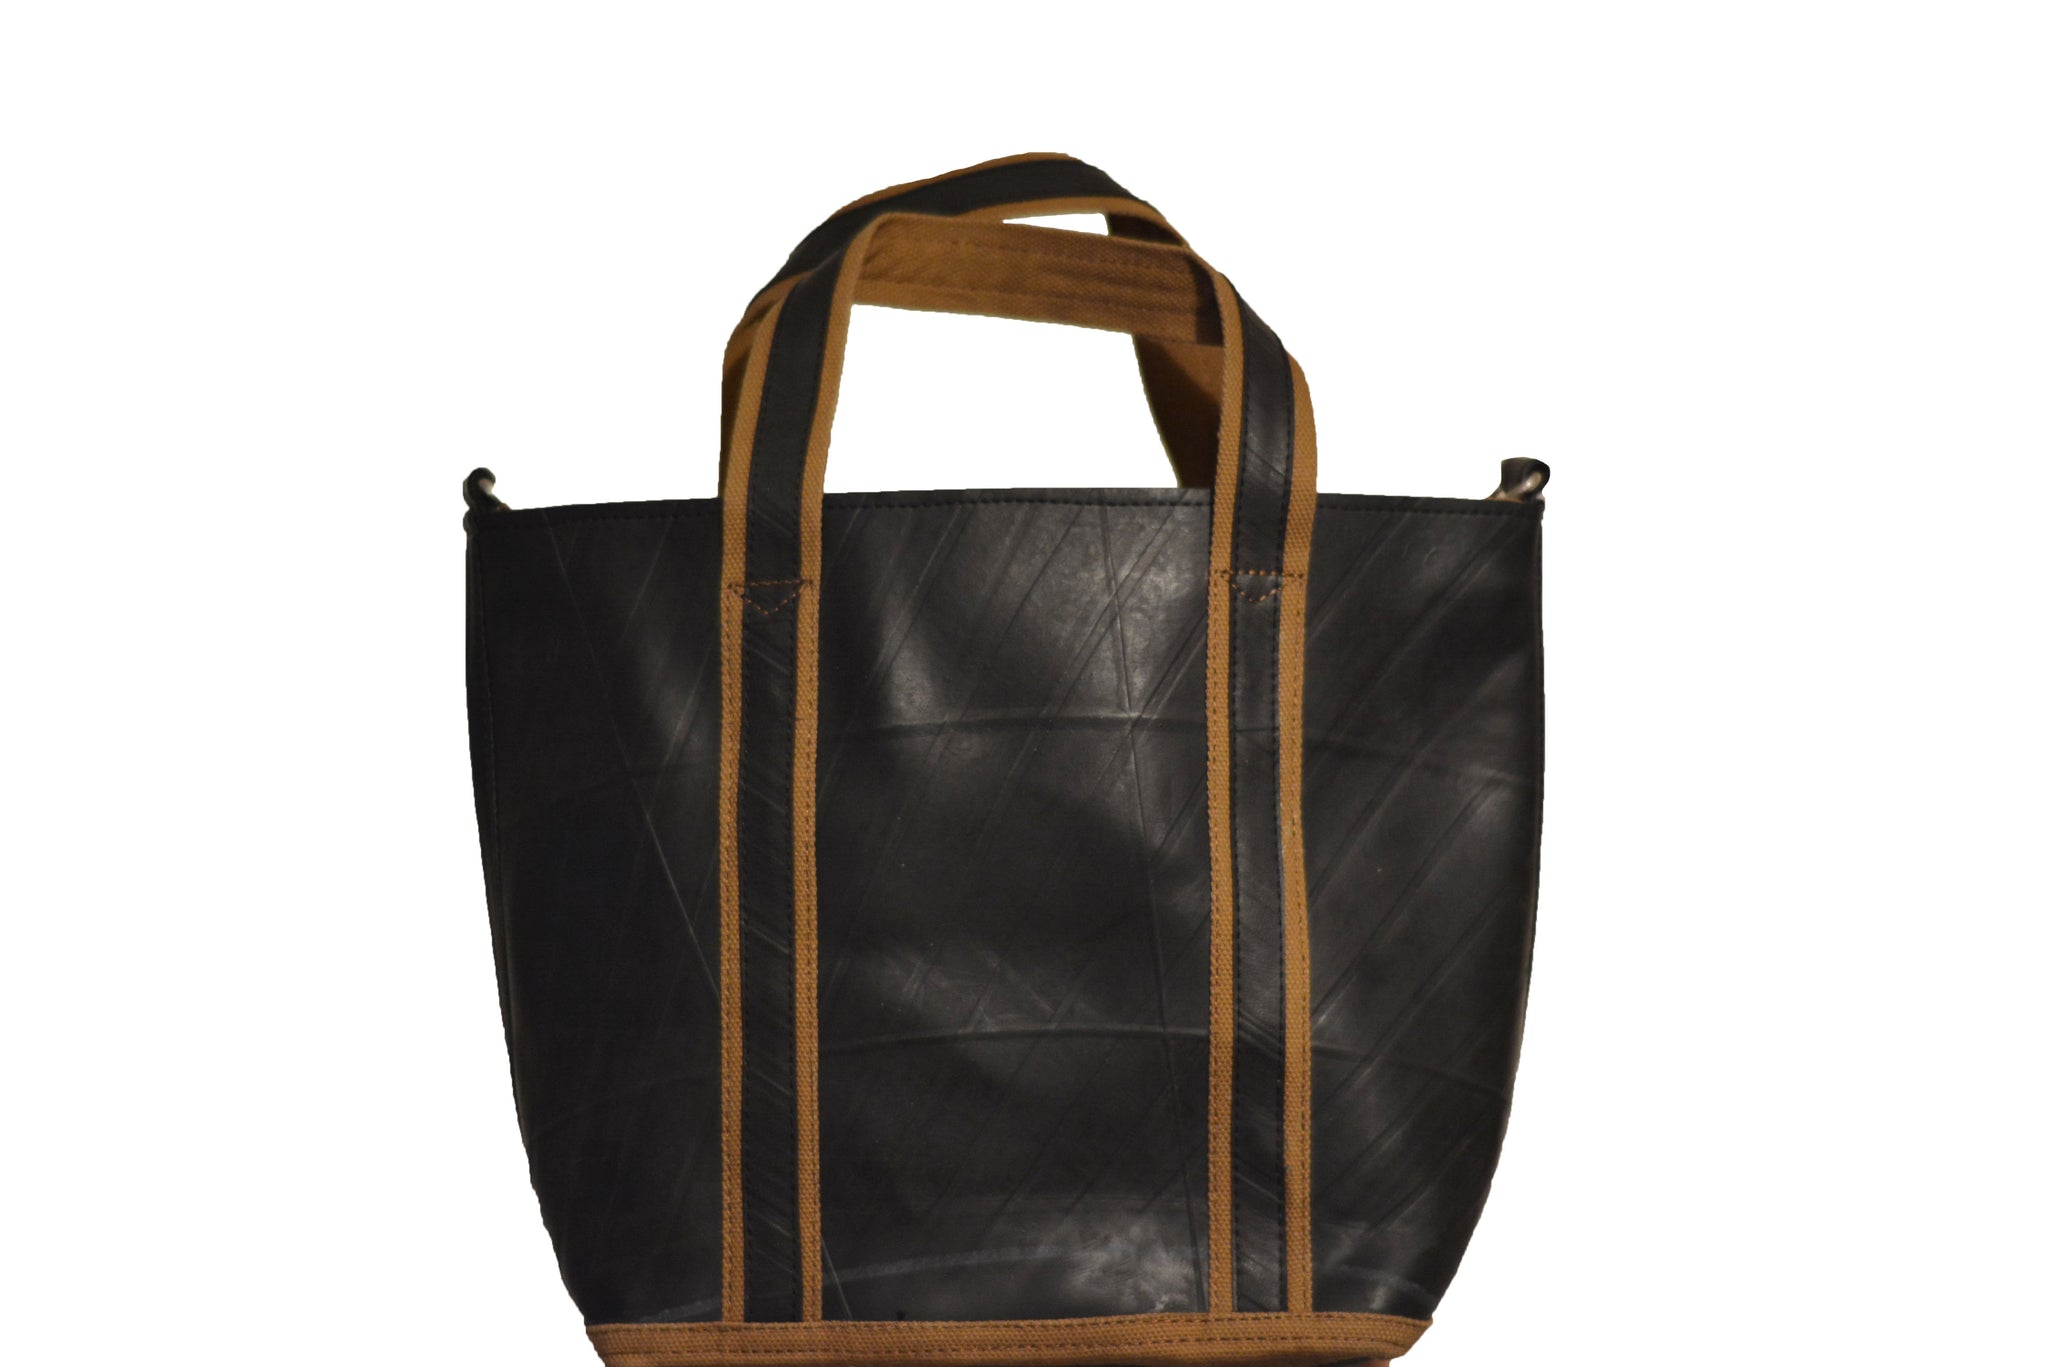 Front view of a fair trade recycled tyre tote bag. The bag is black with a texture from the tyre tread and mustard trim around the bottom of the bag and edging the straps.